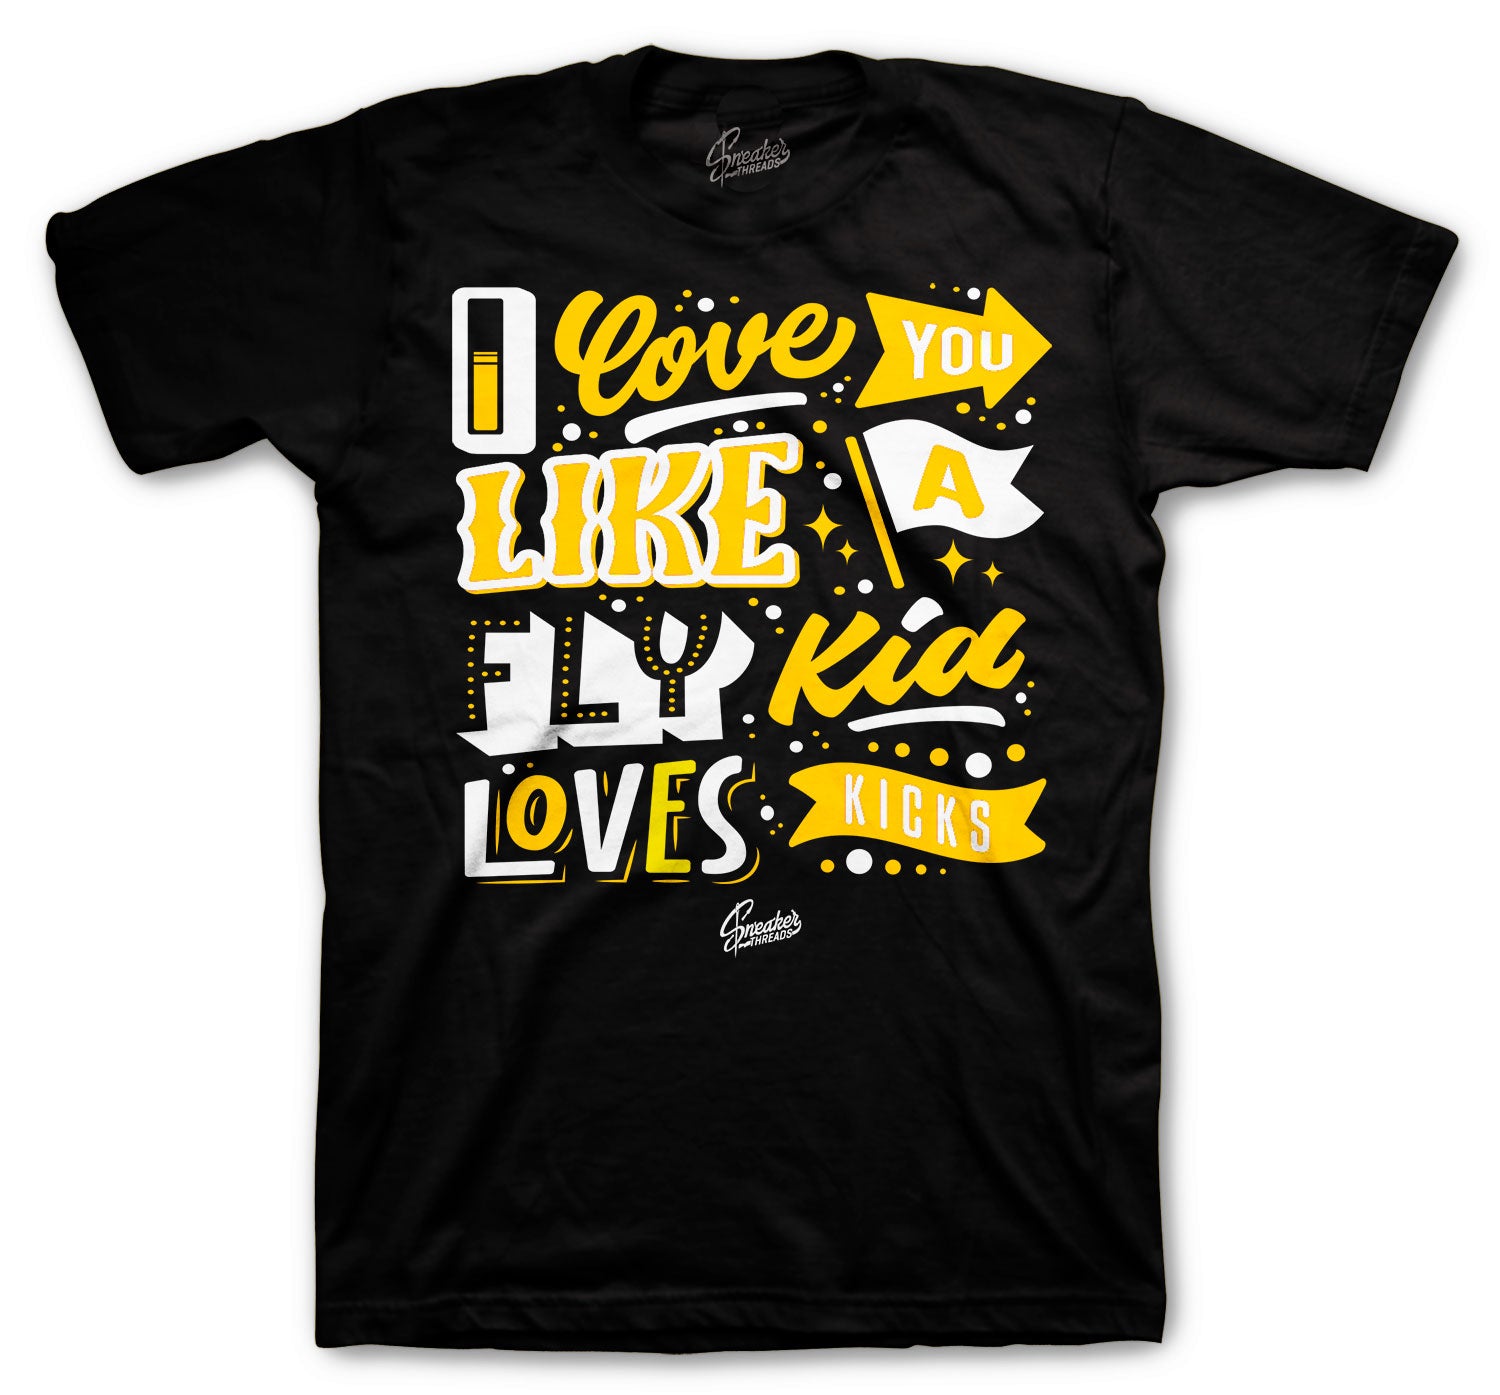 Jordan 12 university Gold sneaker collection matches with mens t shirts